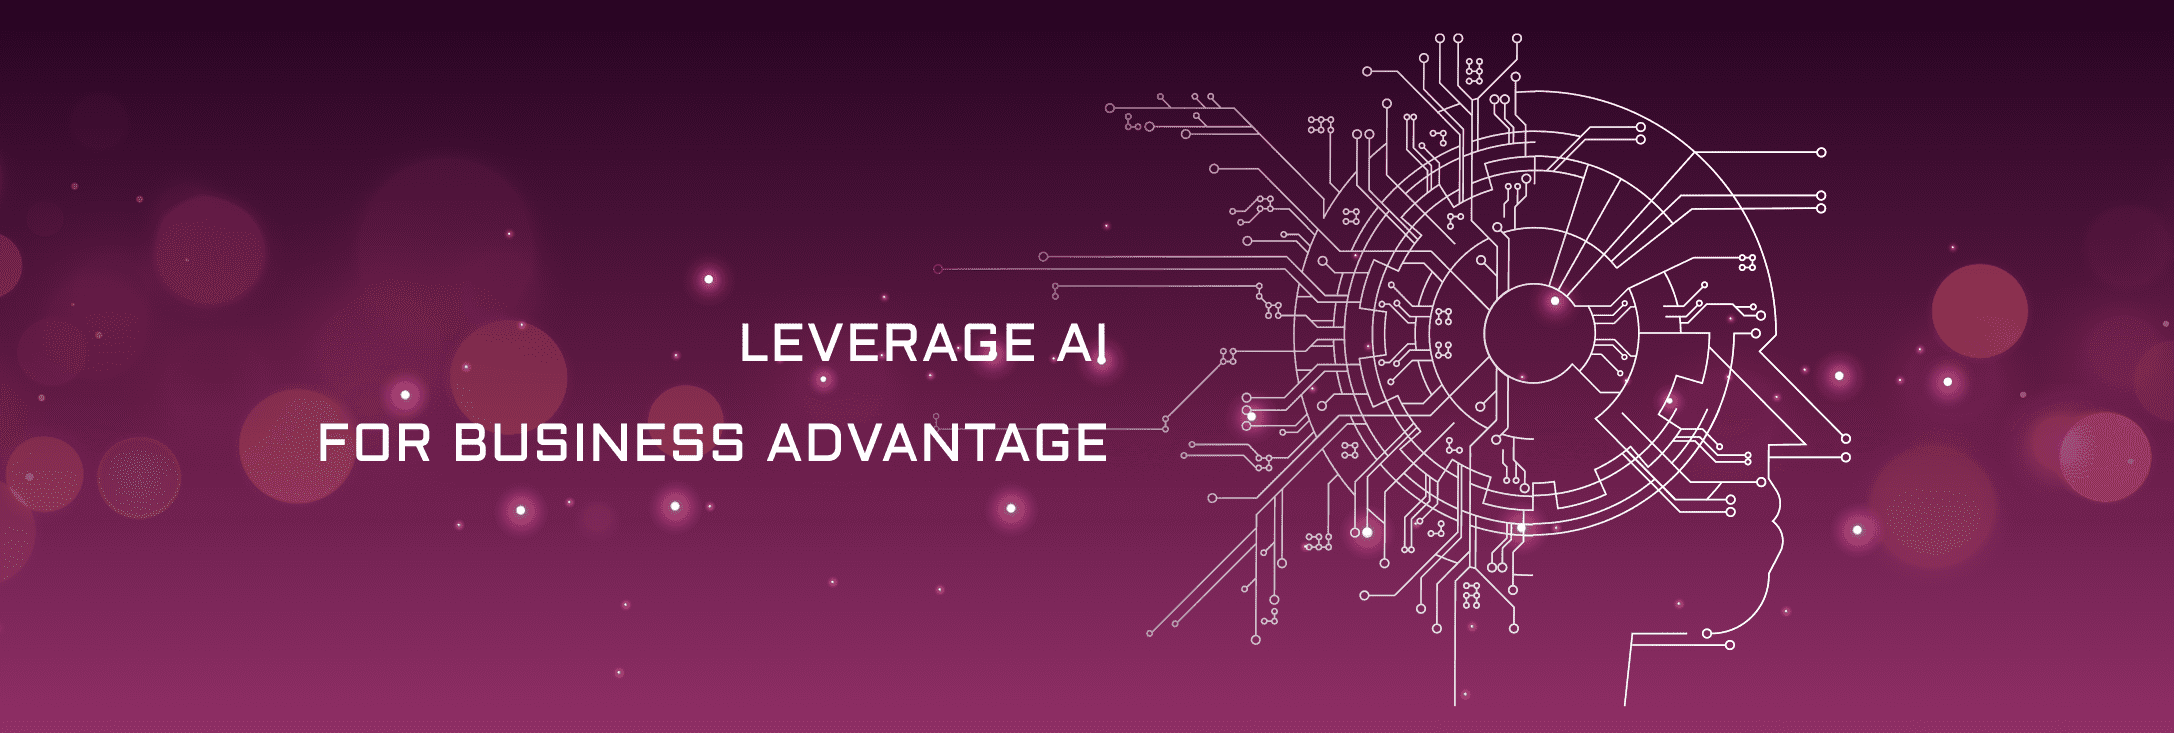 Leverage Artificial Intelligence To Gain Business Advantage